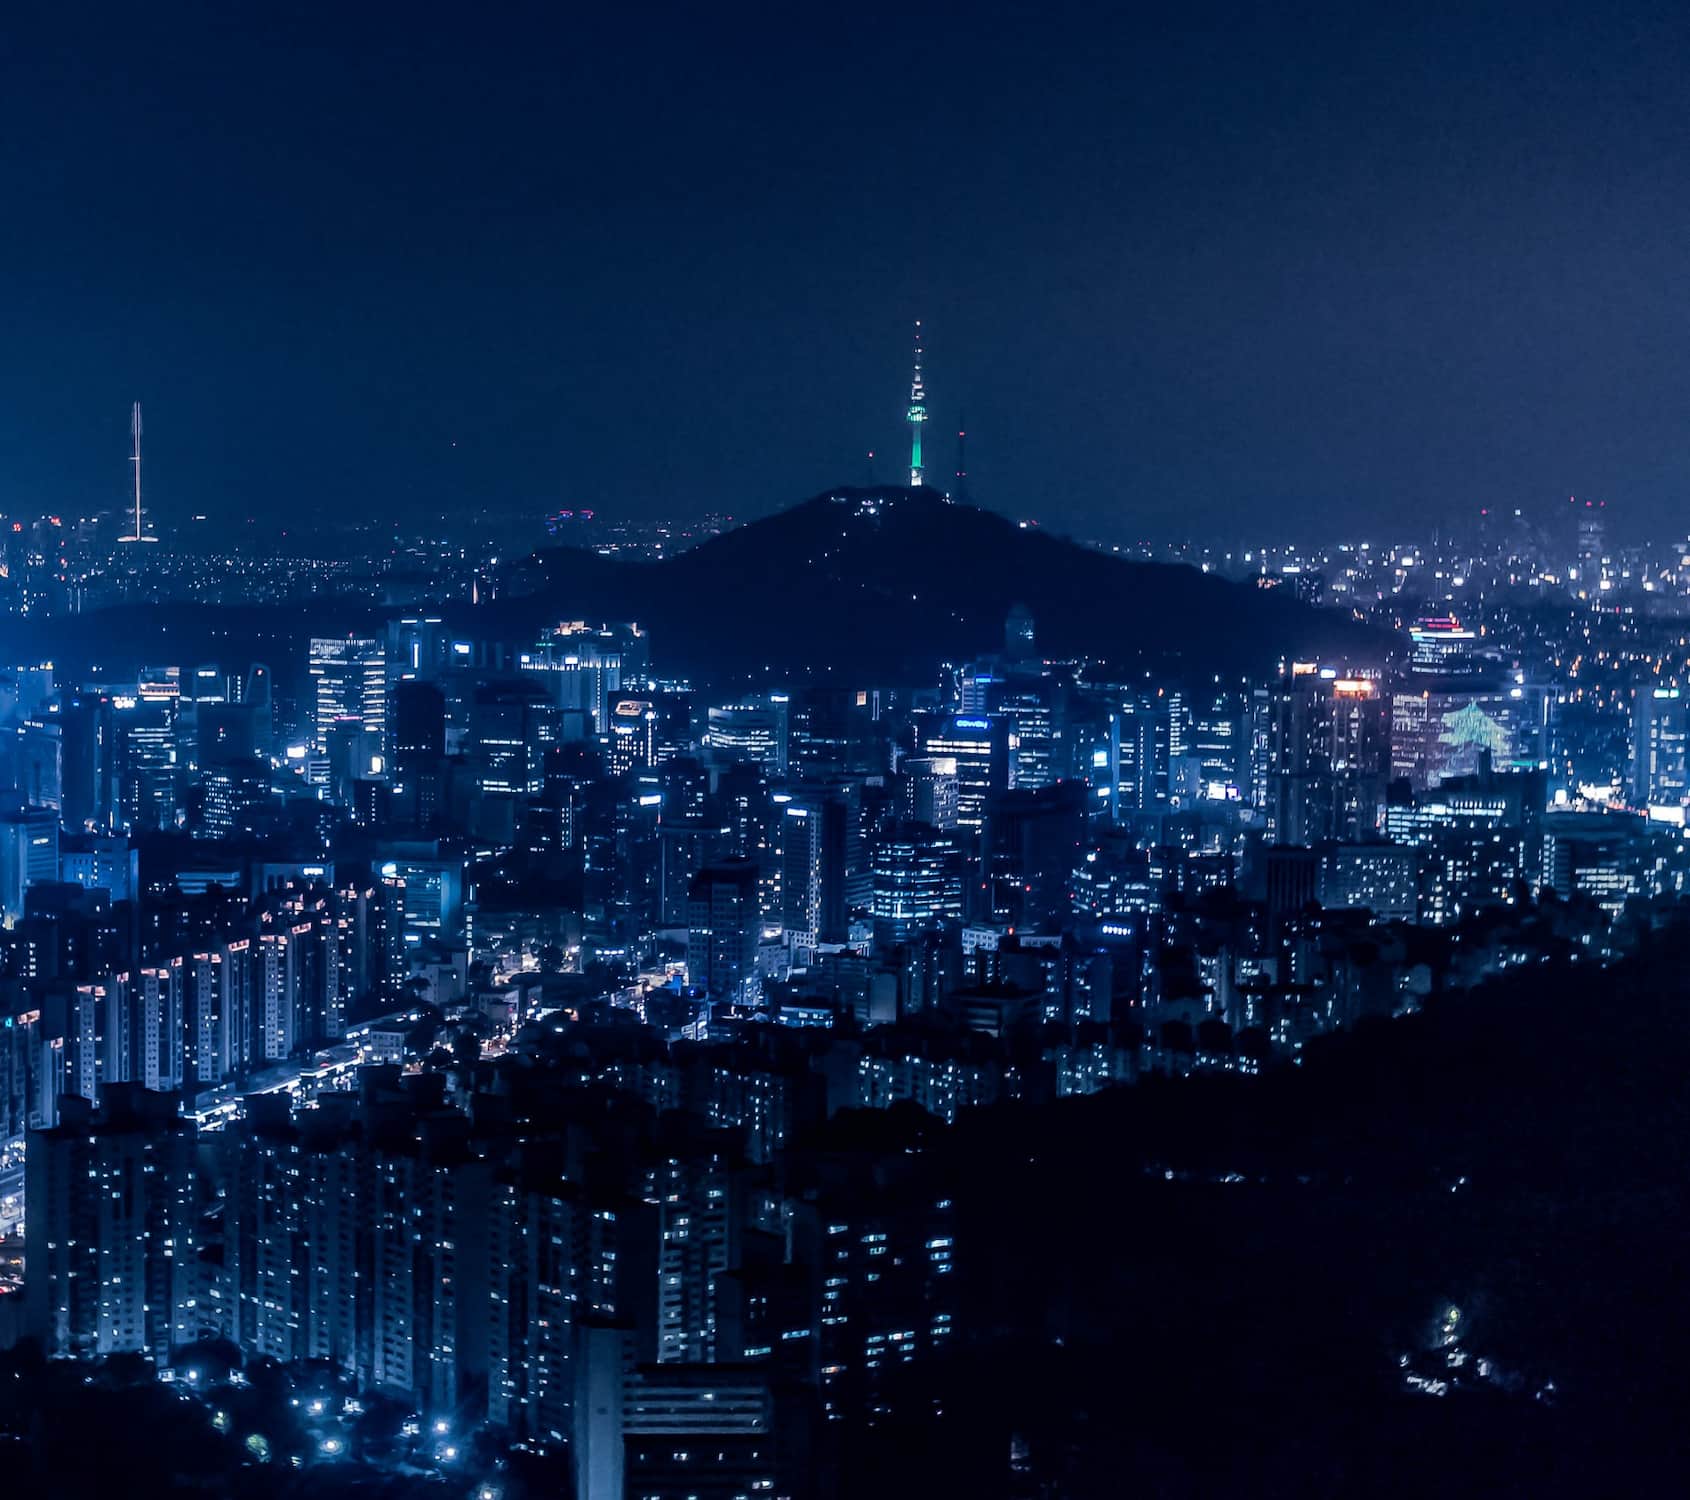 Outline of Seoul at night with the bird's eye view